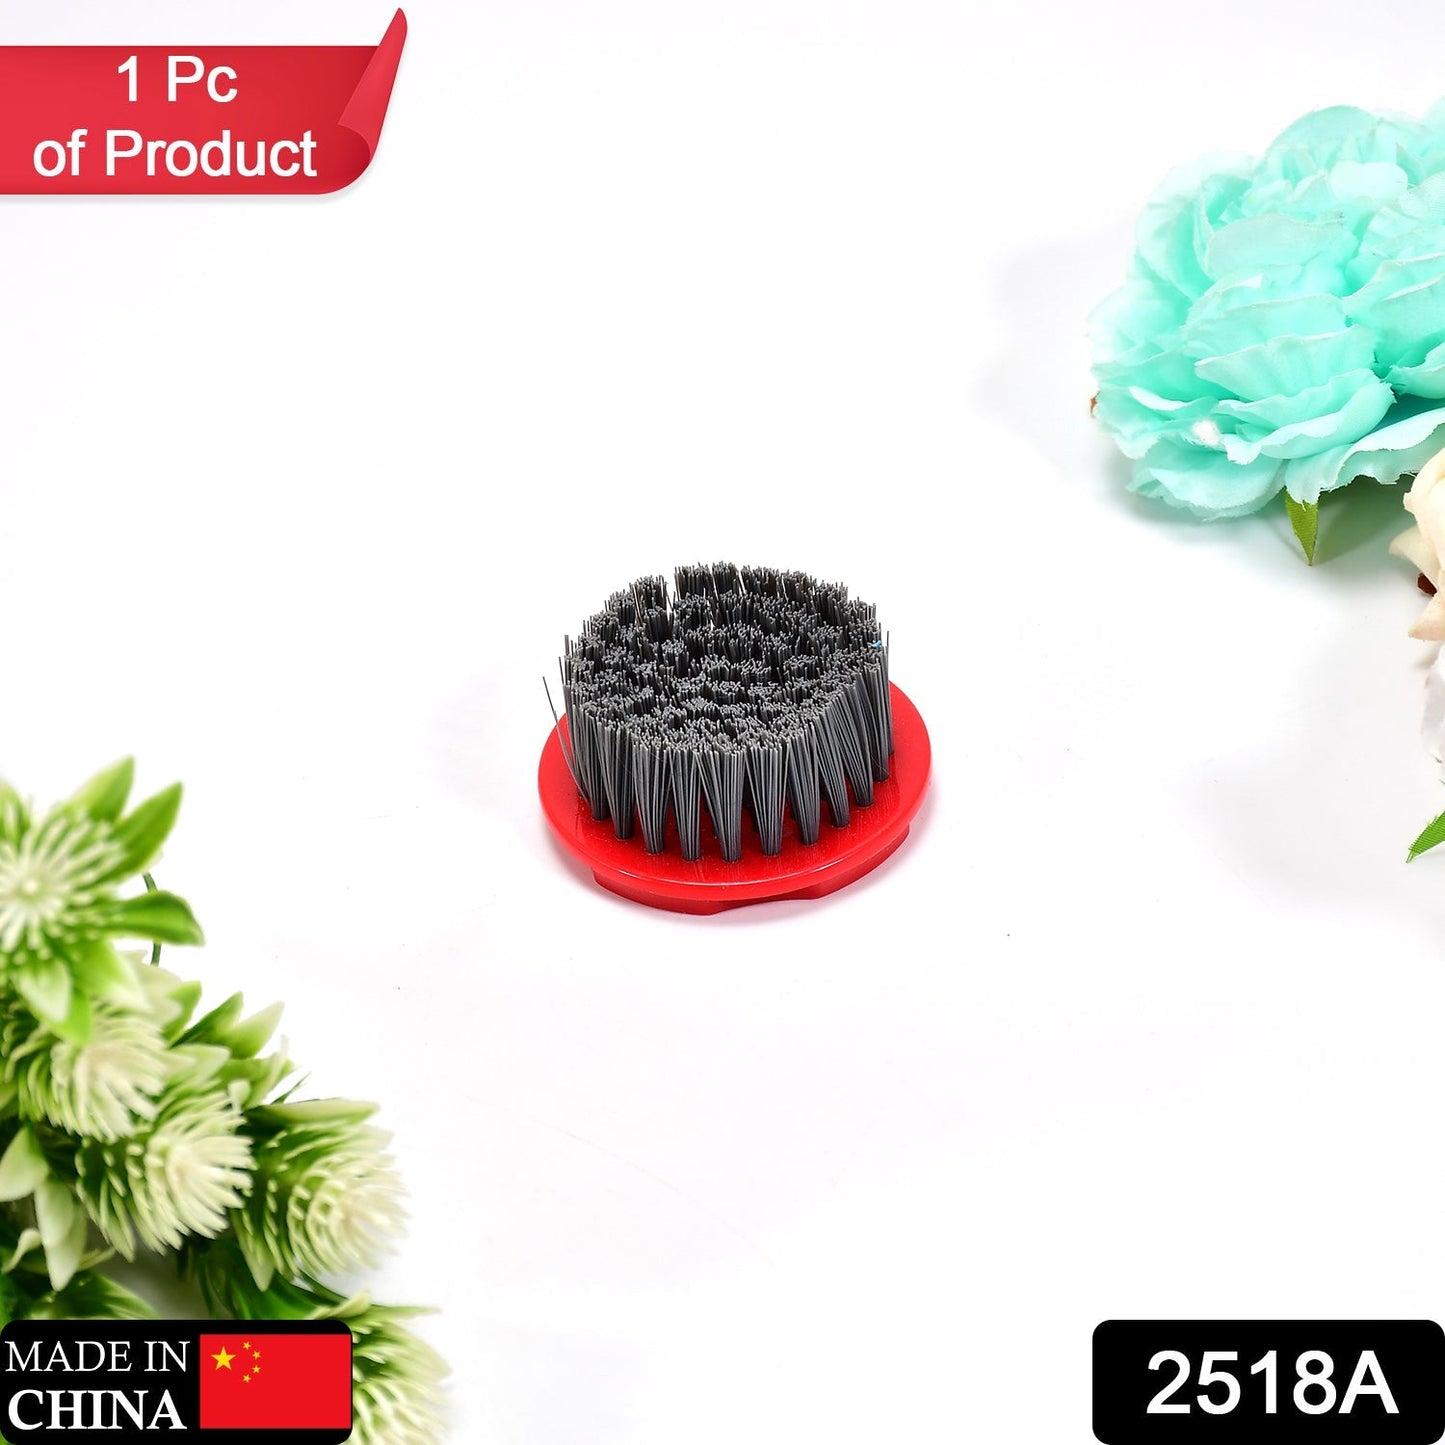 2518A Vegetable fruits cleaning brush nylon round pastry brush DeoDap